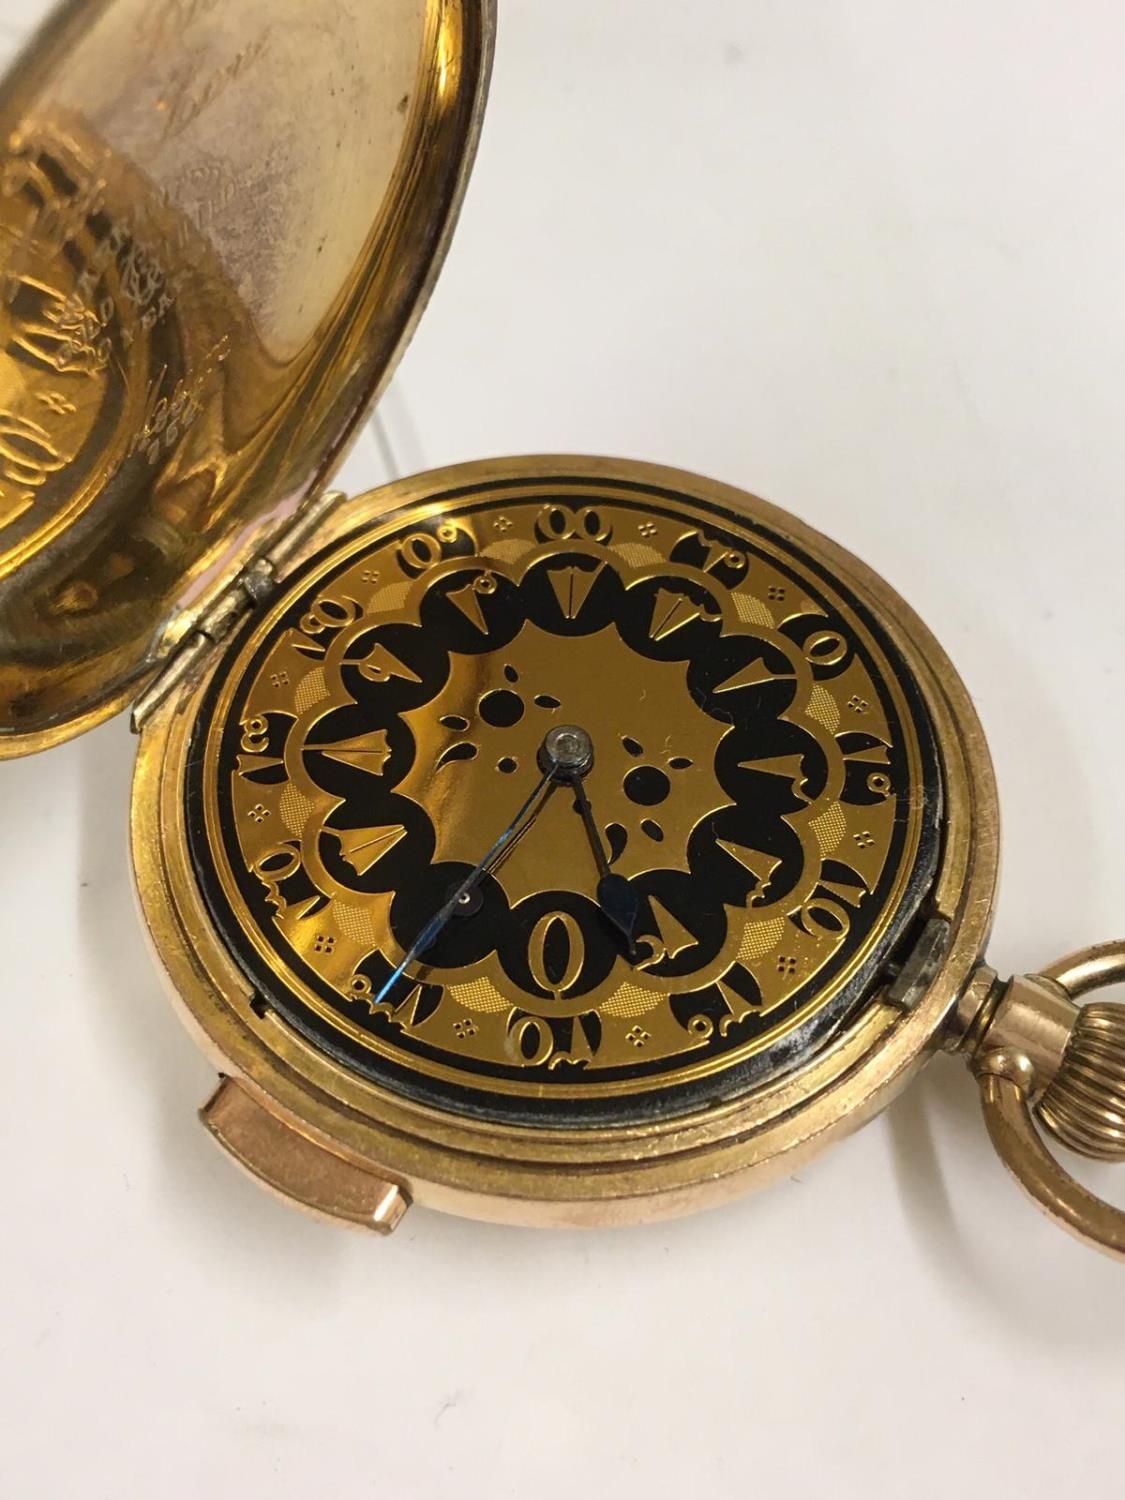 Vintage gold filled ottoman quarter repeater pocket watch ticking and repeat function working . Sold - Image 2 of 7